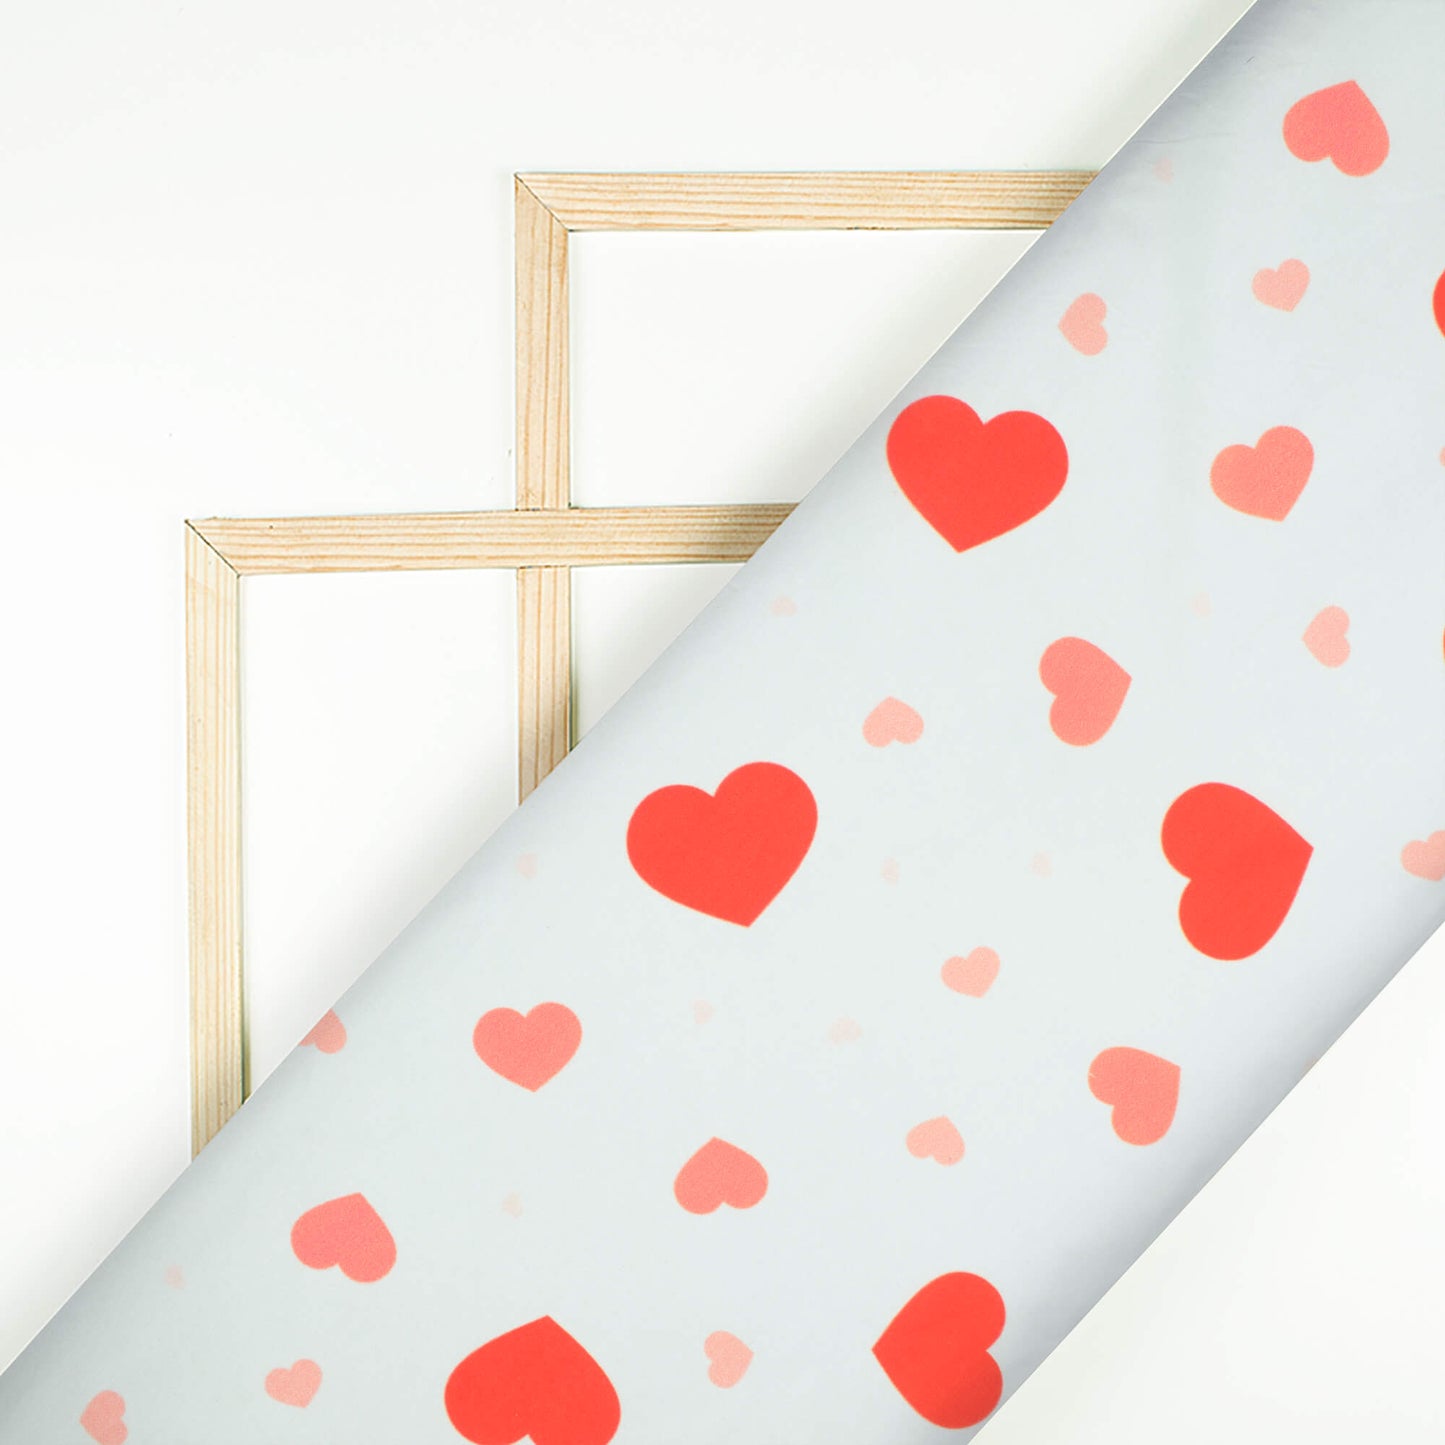 Snow White And Red Heart Pattern Digital Print Ultra Premium Butter Crepe Fabric - Fabcurate